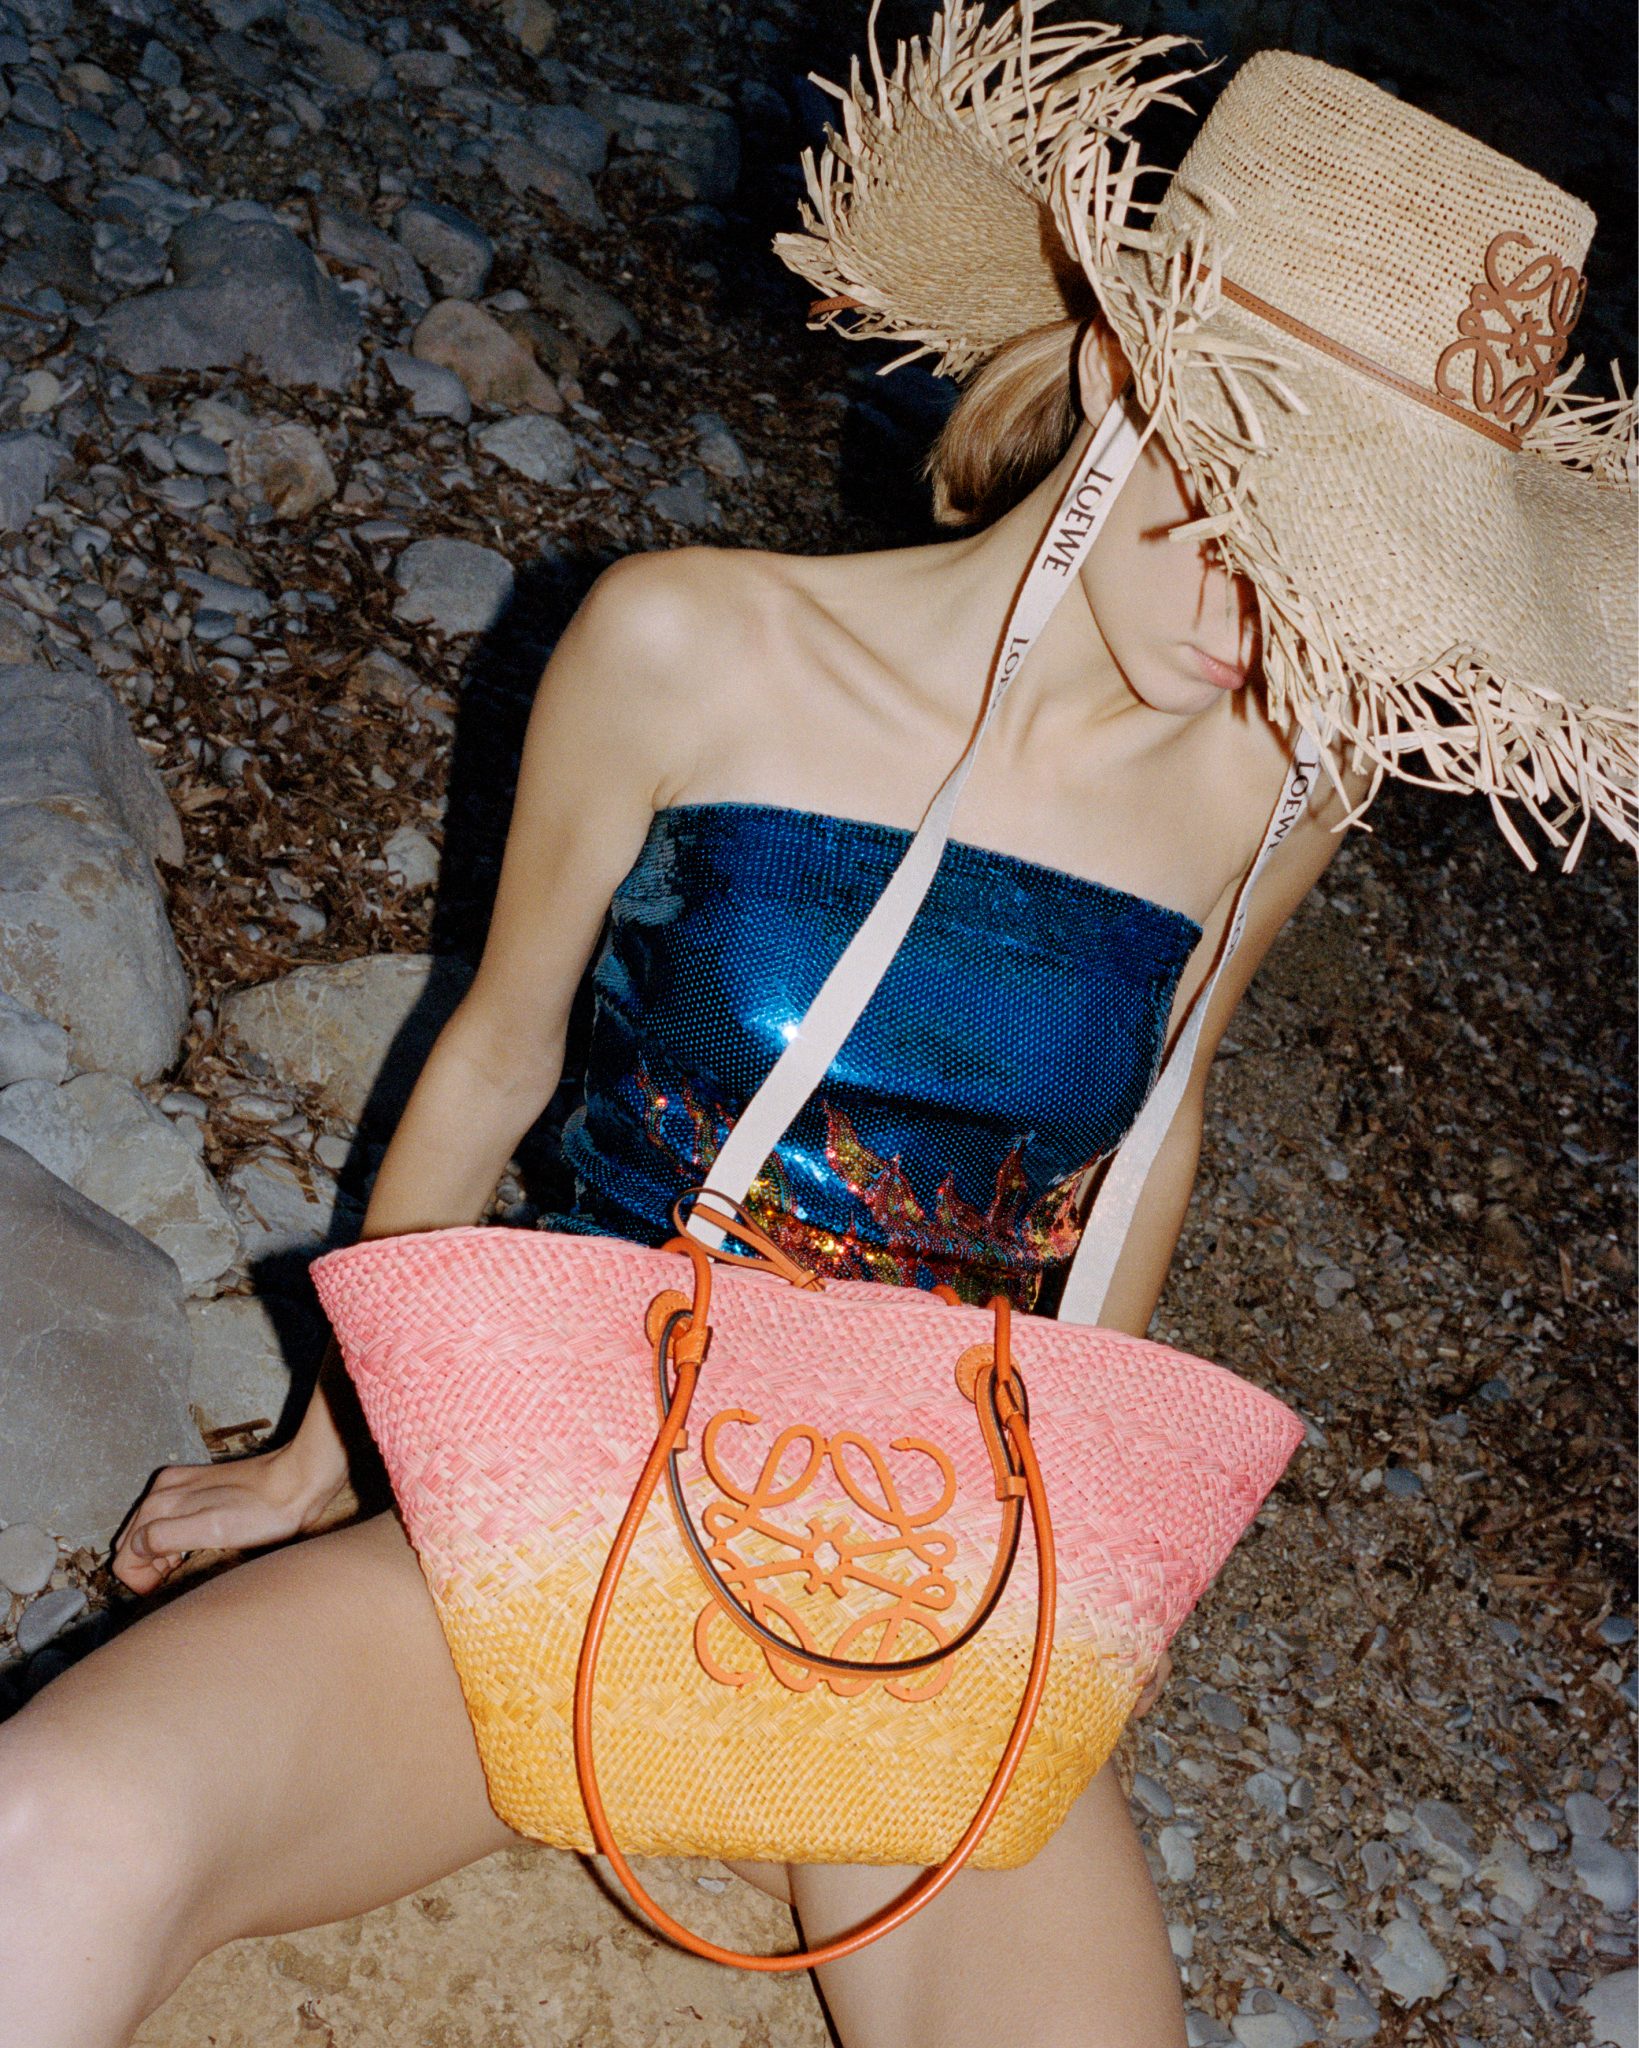 Jonathan Anderson gets personal with the new Loewe Paula's Ibiza collection